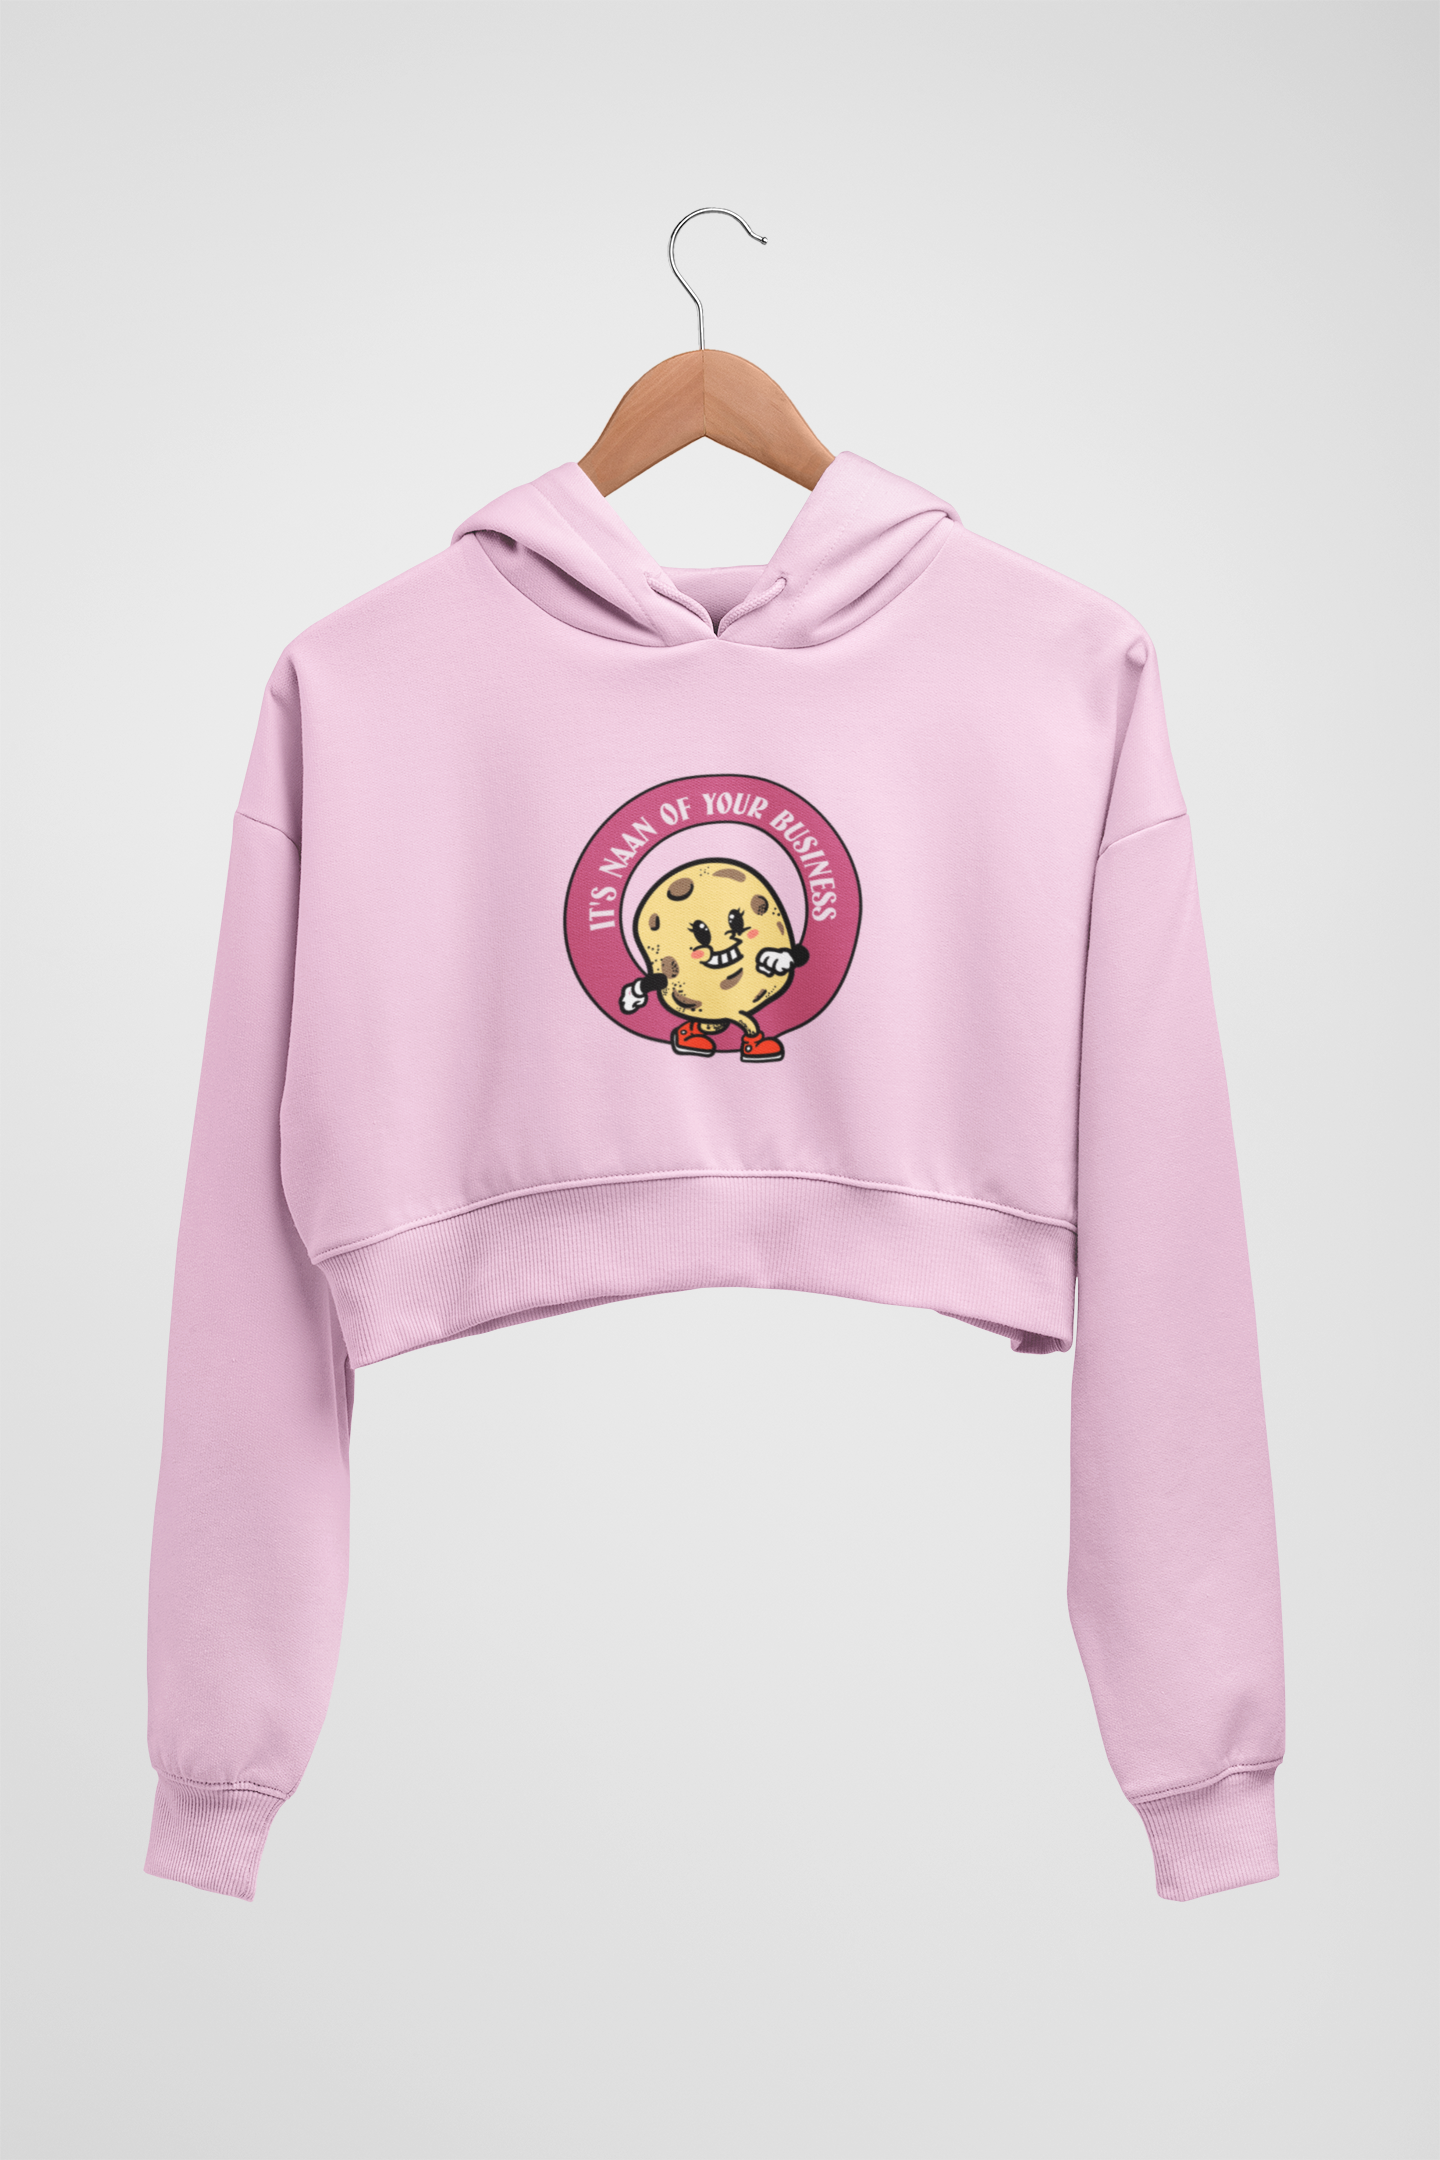 CROP HOODIES PINK x IT'S NAAN OF YOUR BUSSINESS